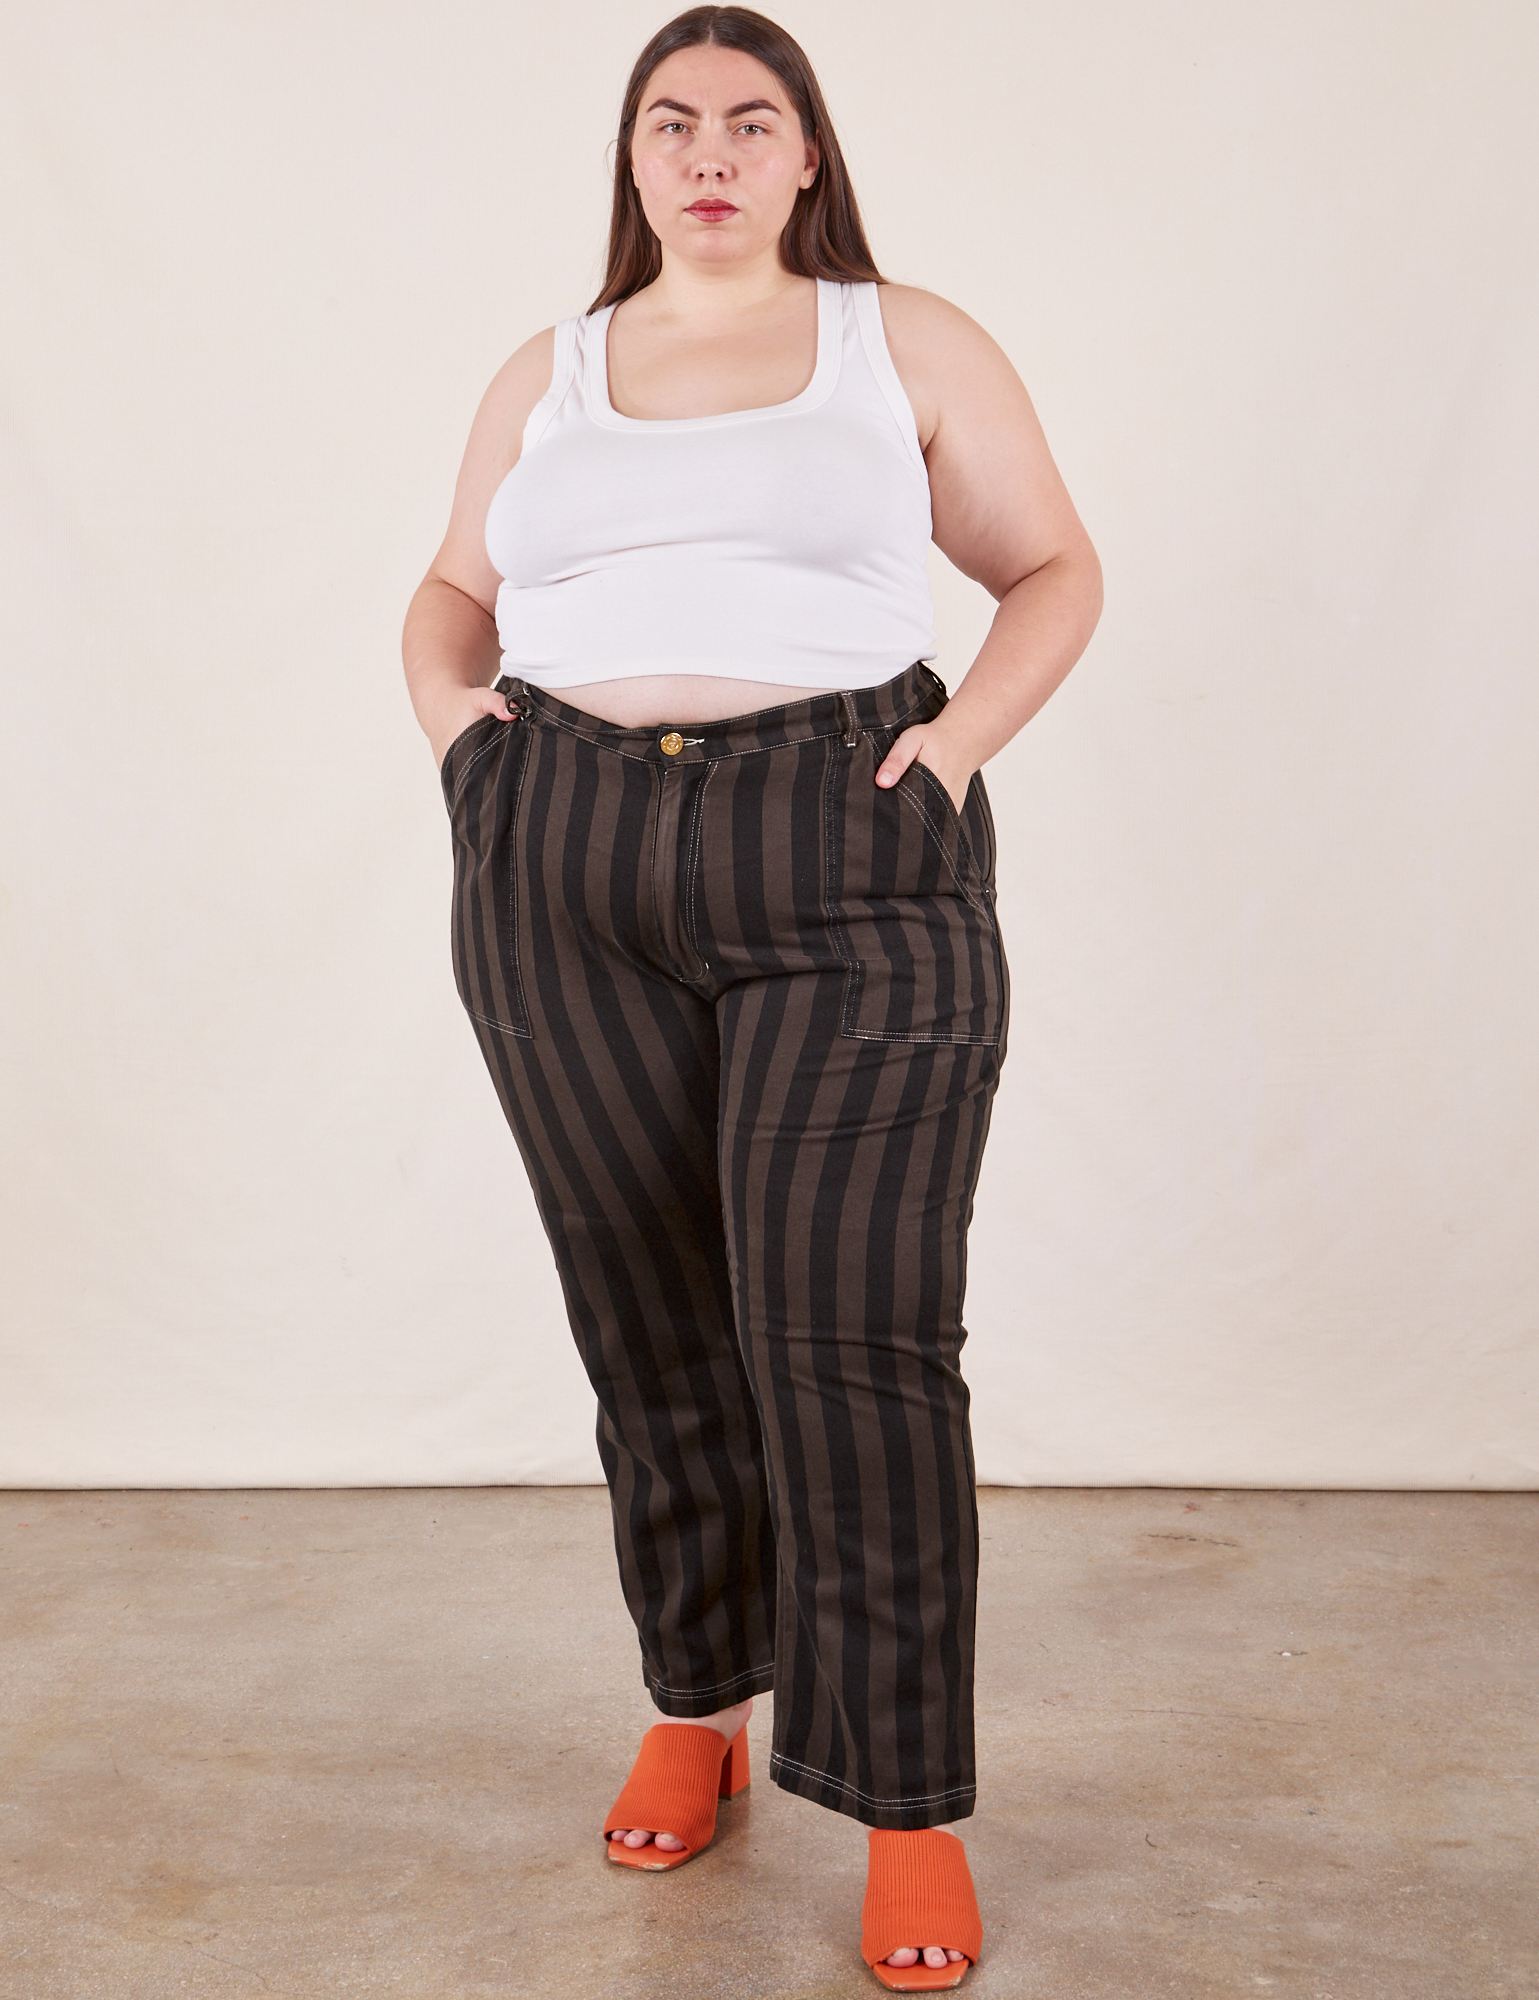 Marielena is 5&#39;8&quot; and wearing 2XL Black Striped Work Pants in Espresso paired with vintage off-white Cropped Tank Top